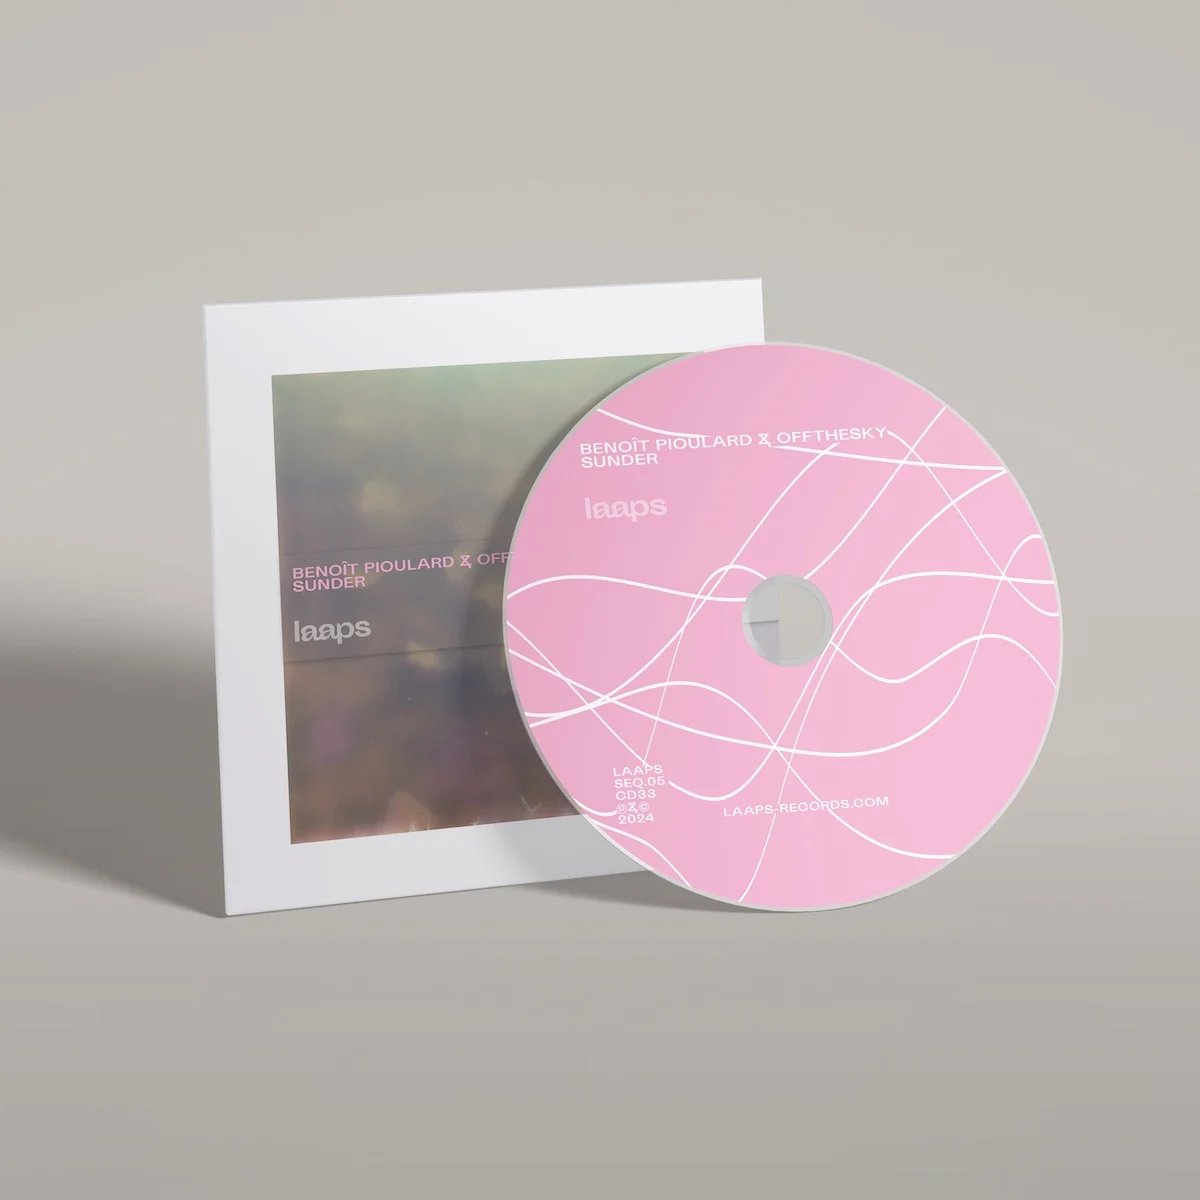 PRE-ORDER: 'Sunder' by Benoît Pioulard & offthesky Two artists link up for a full-length loaded with dreamy ambient melters. @pioulard @offthesky normanrecords.com/records/201292…